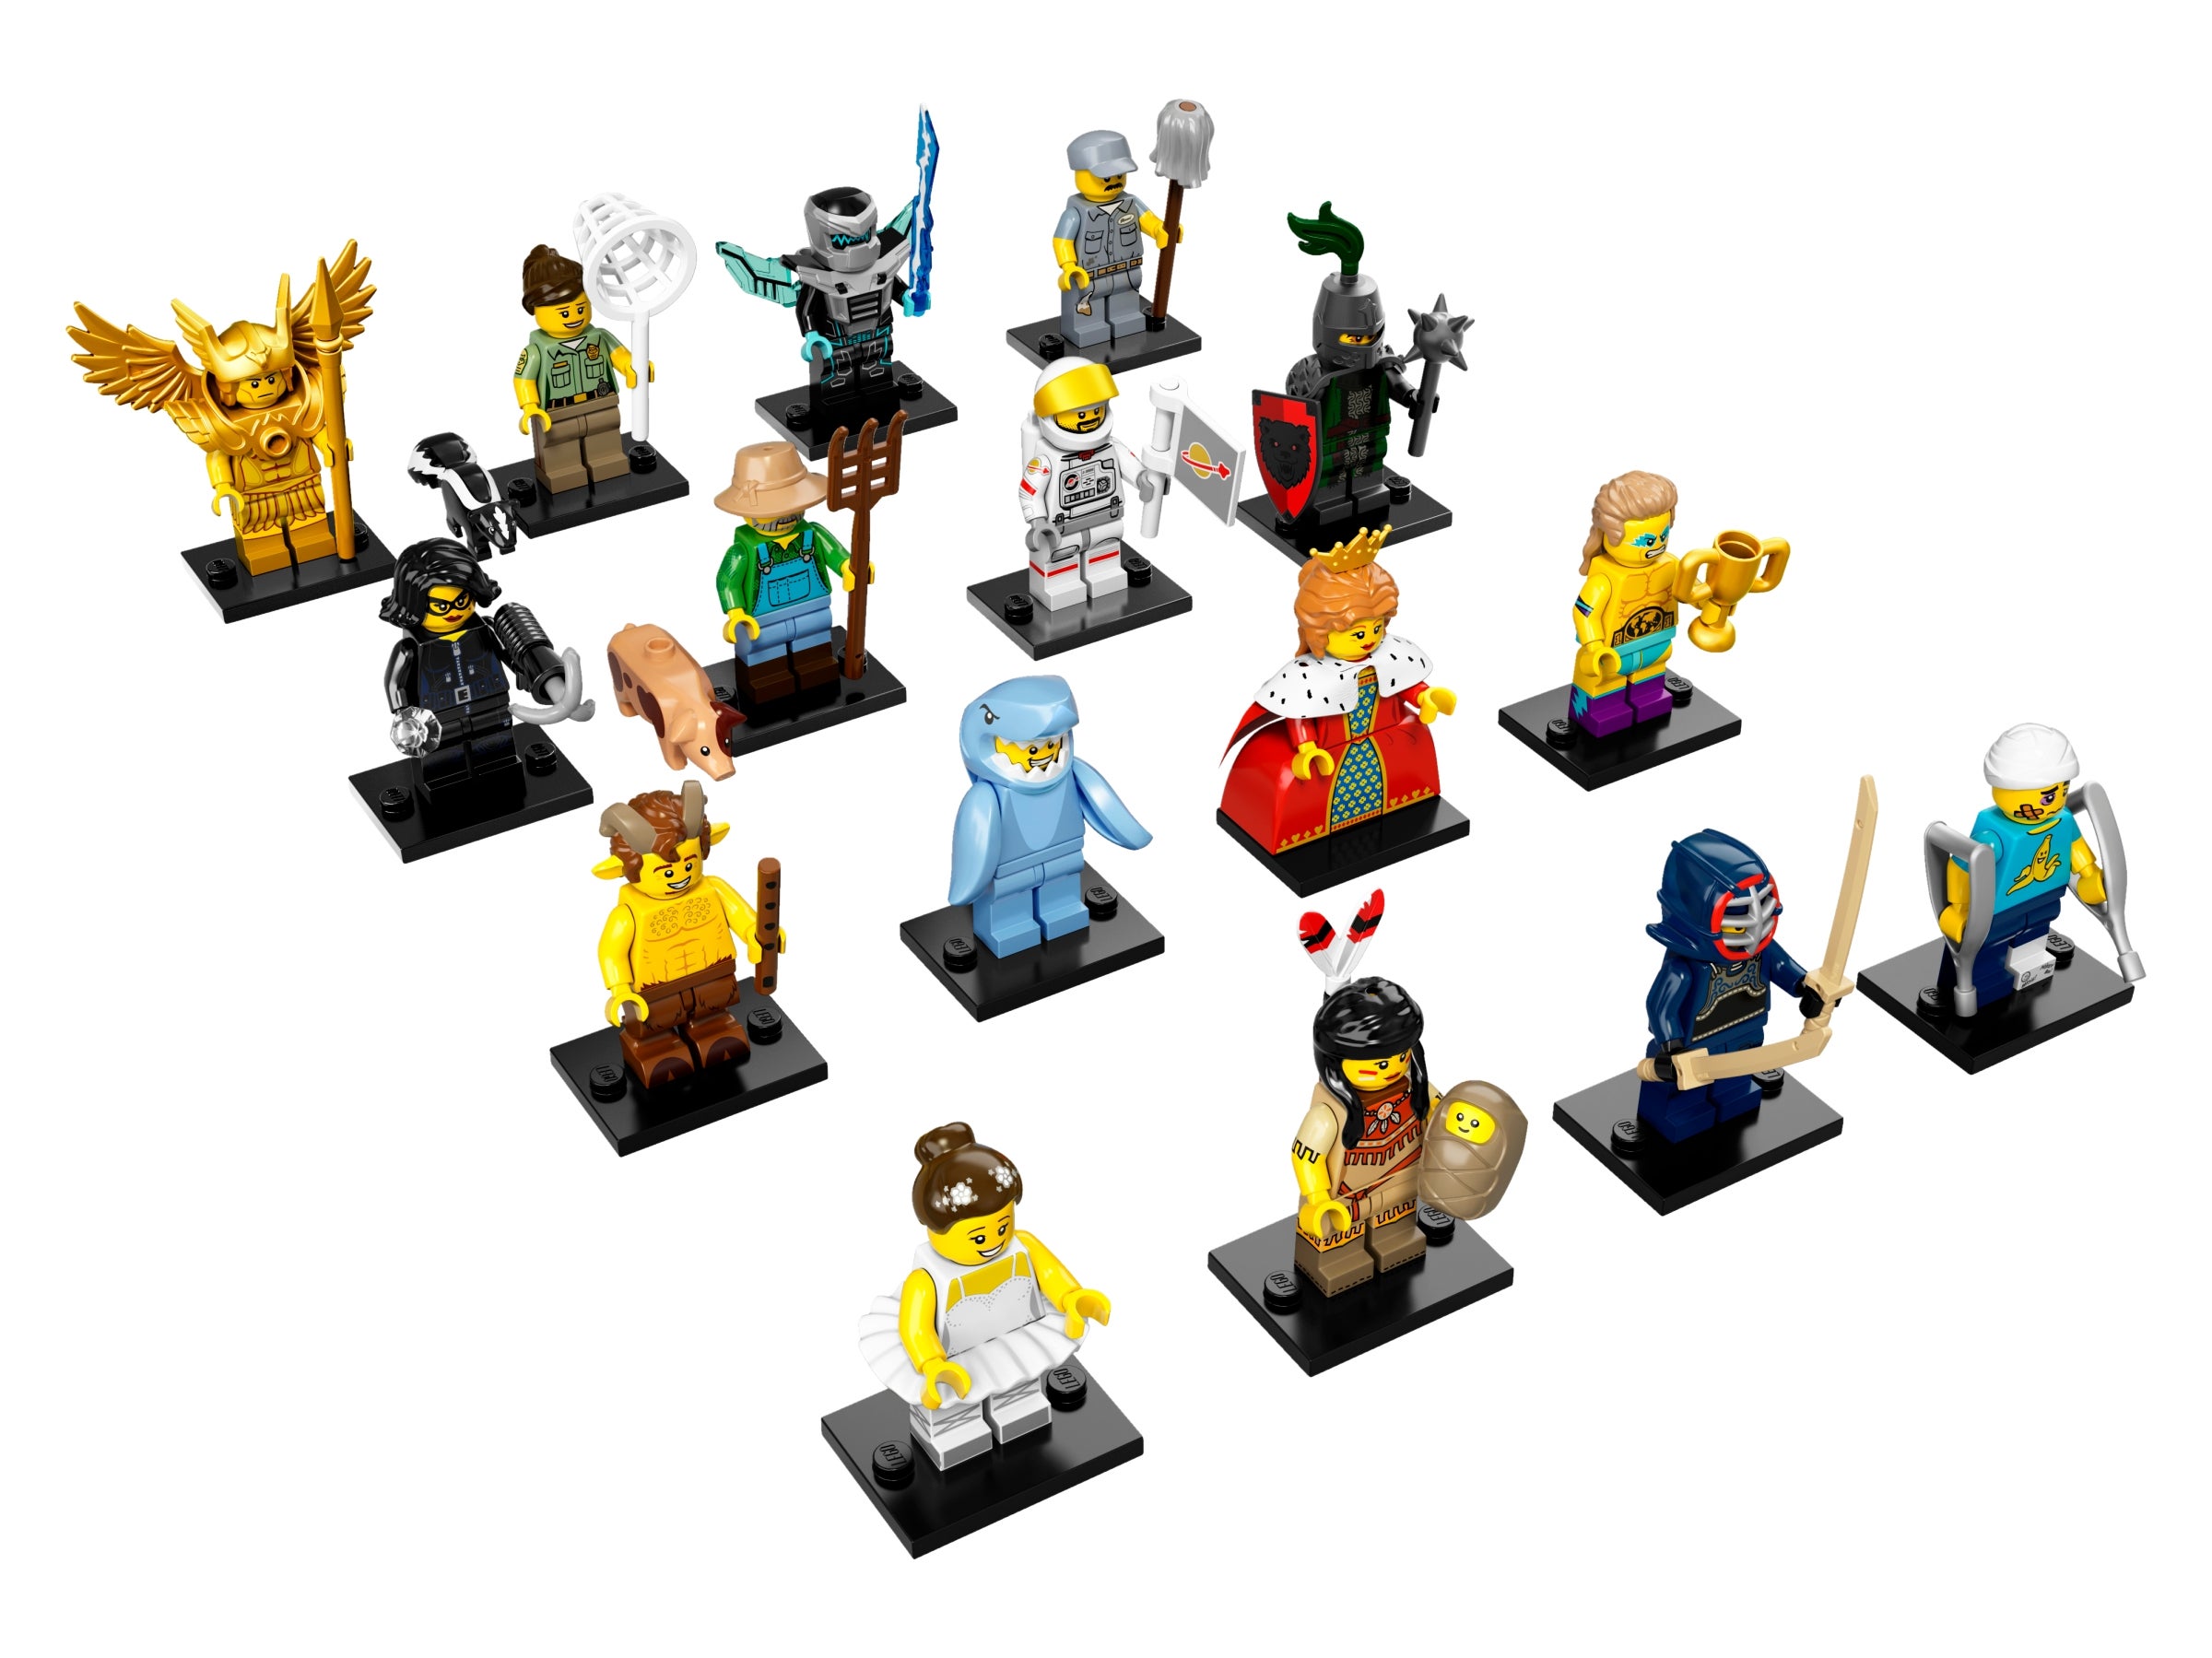 LEGO Minifigures Series 15 71011 Choose Your Own Buy 2 get 1 free!